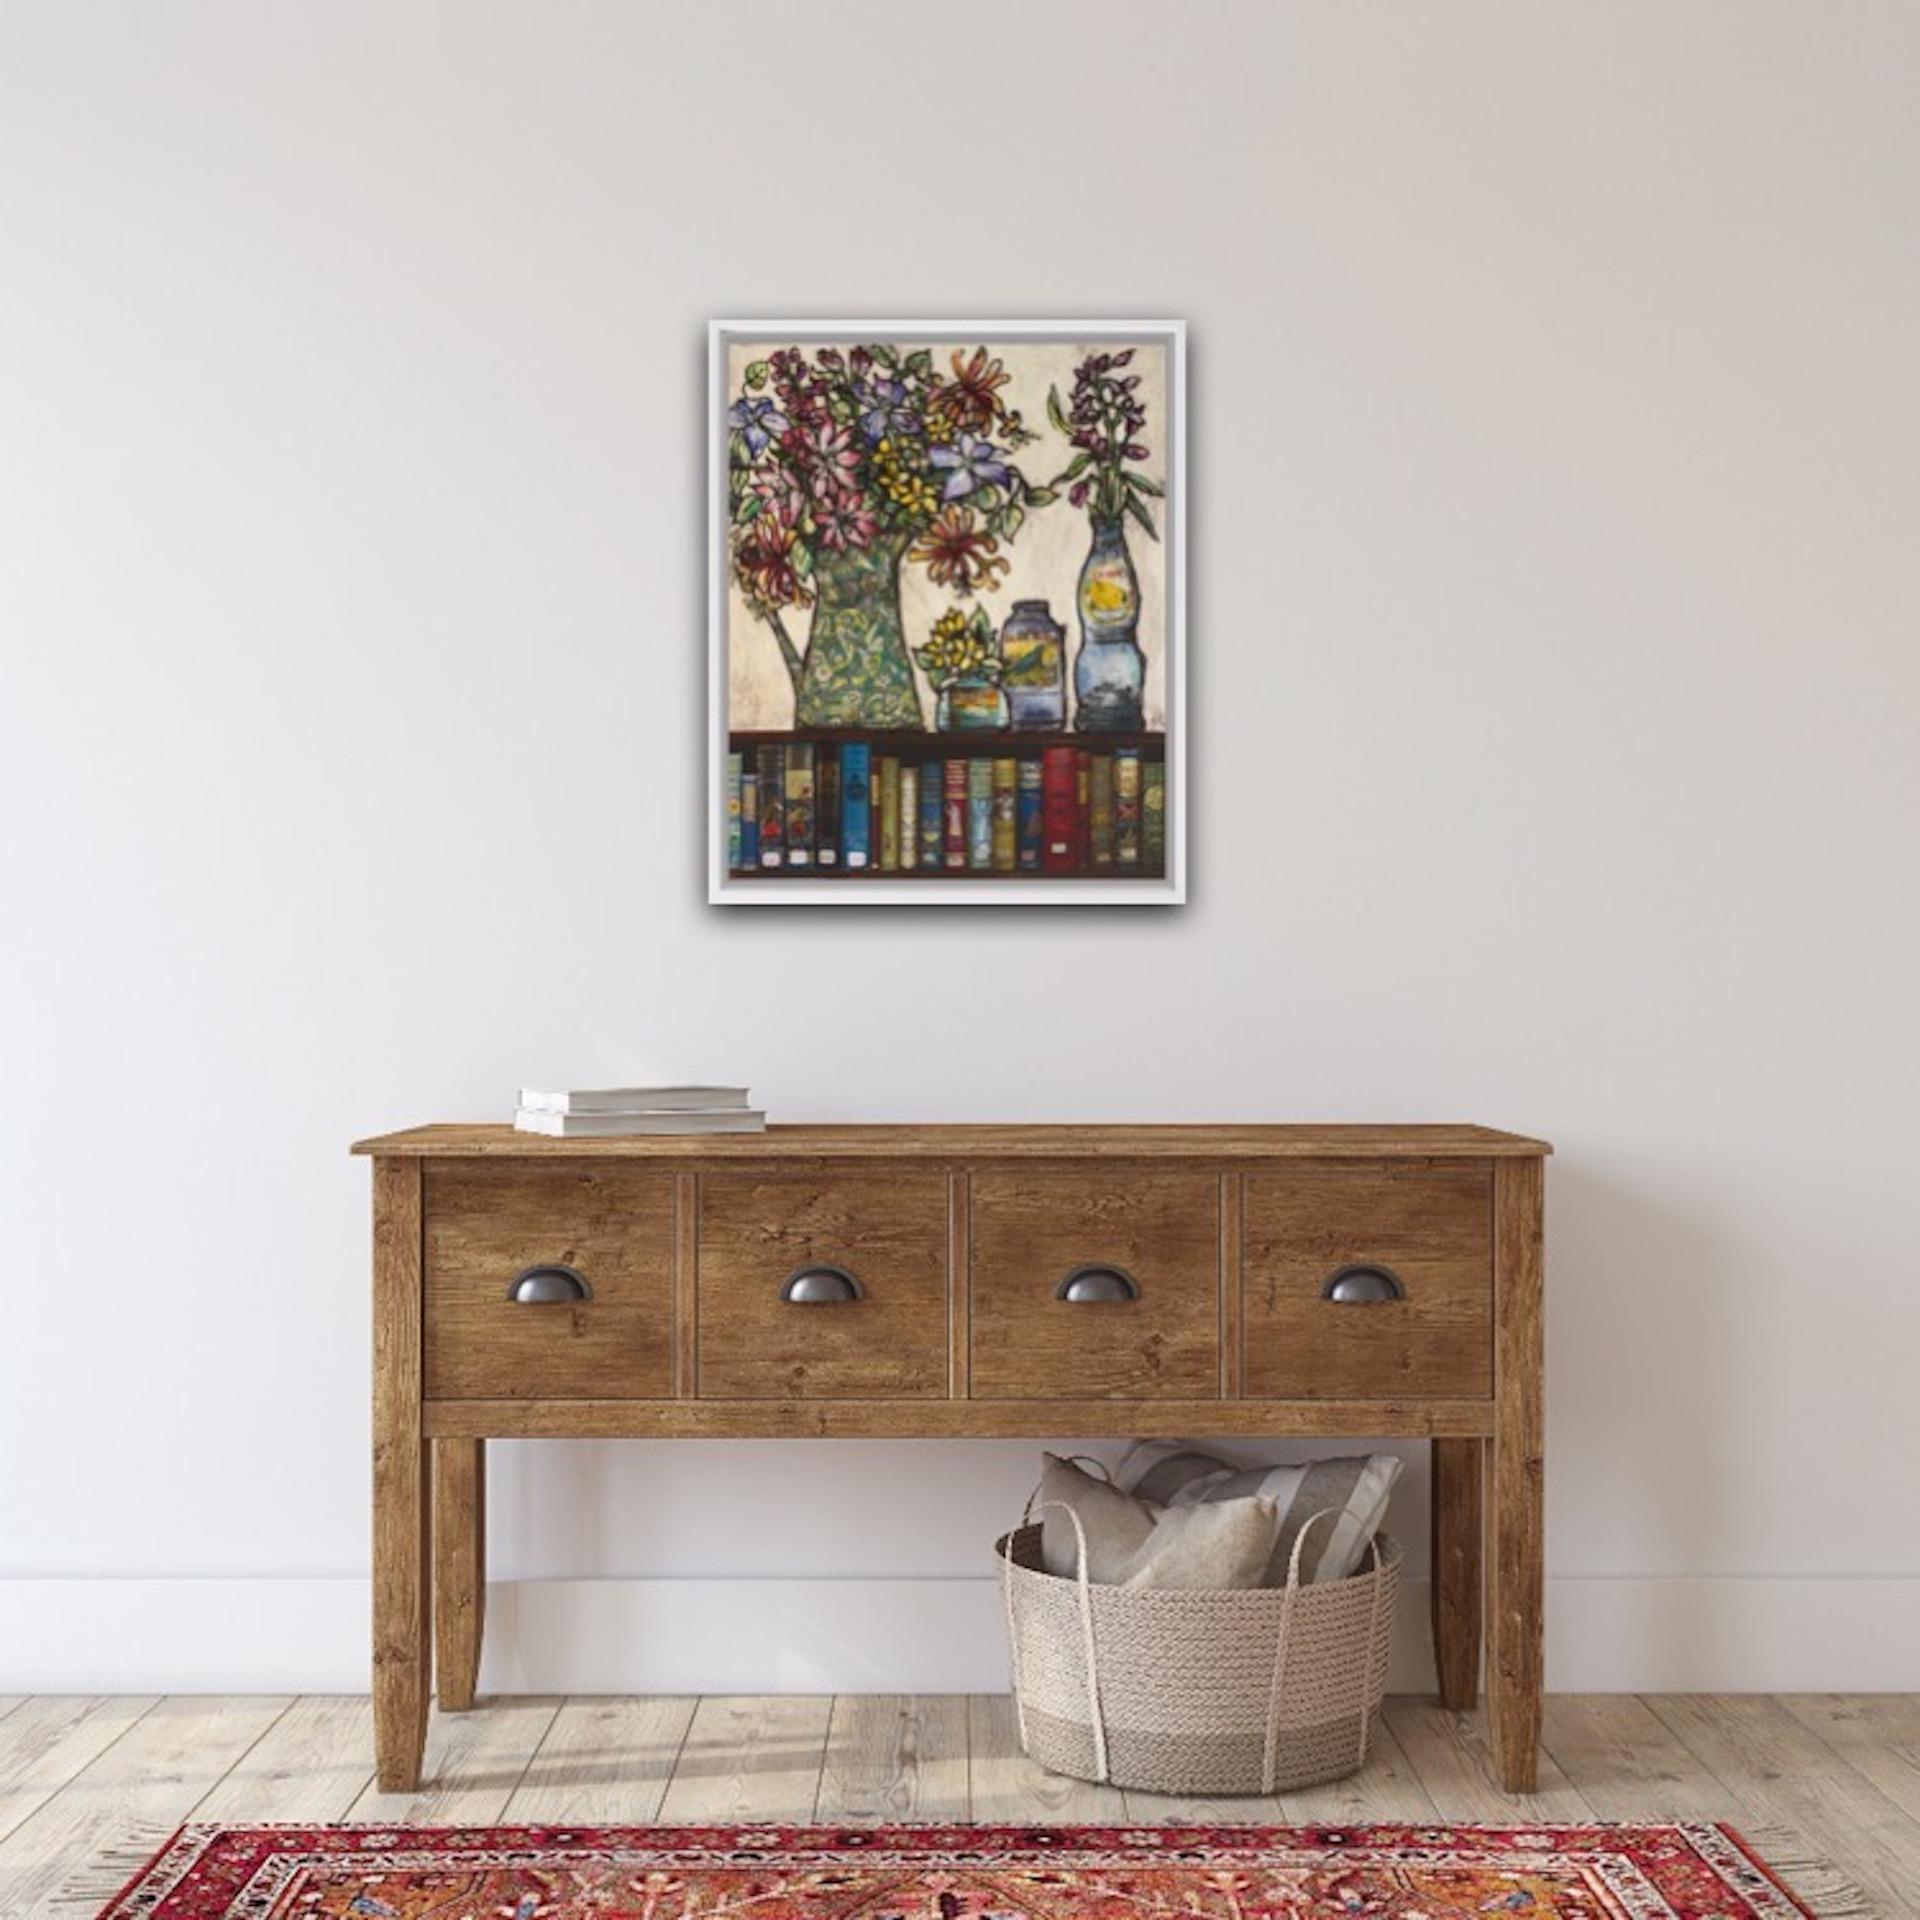 Vicky Oldfield, Moments of Reflection, Affordable Contemporary Still Life Prints For Sale 1